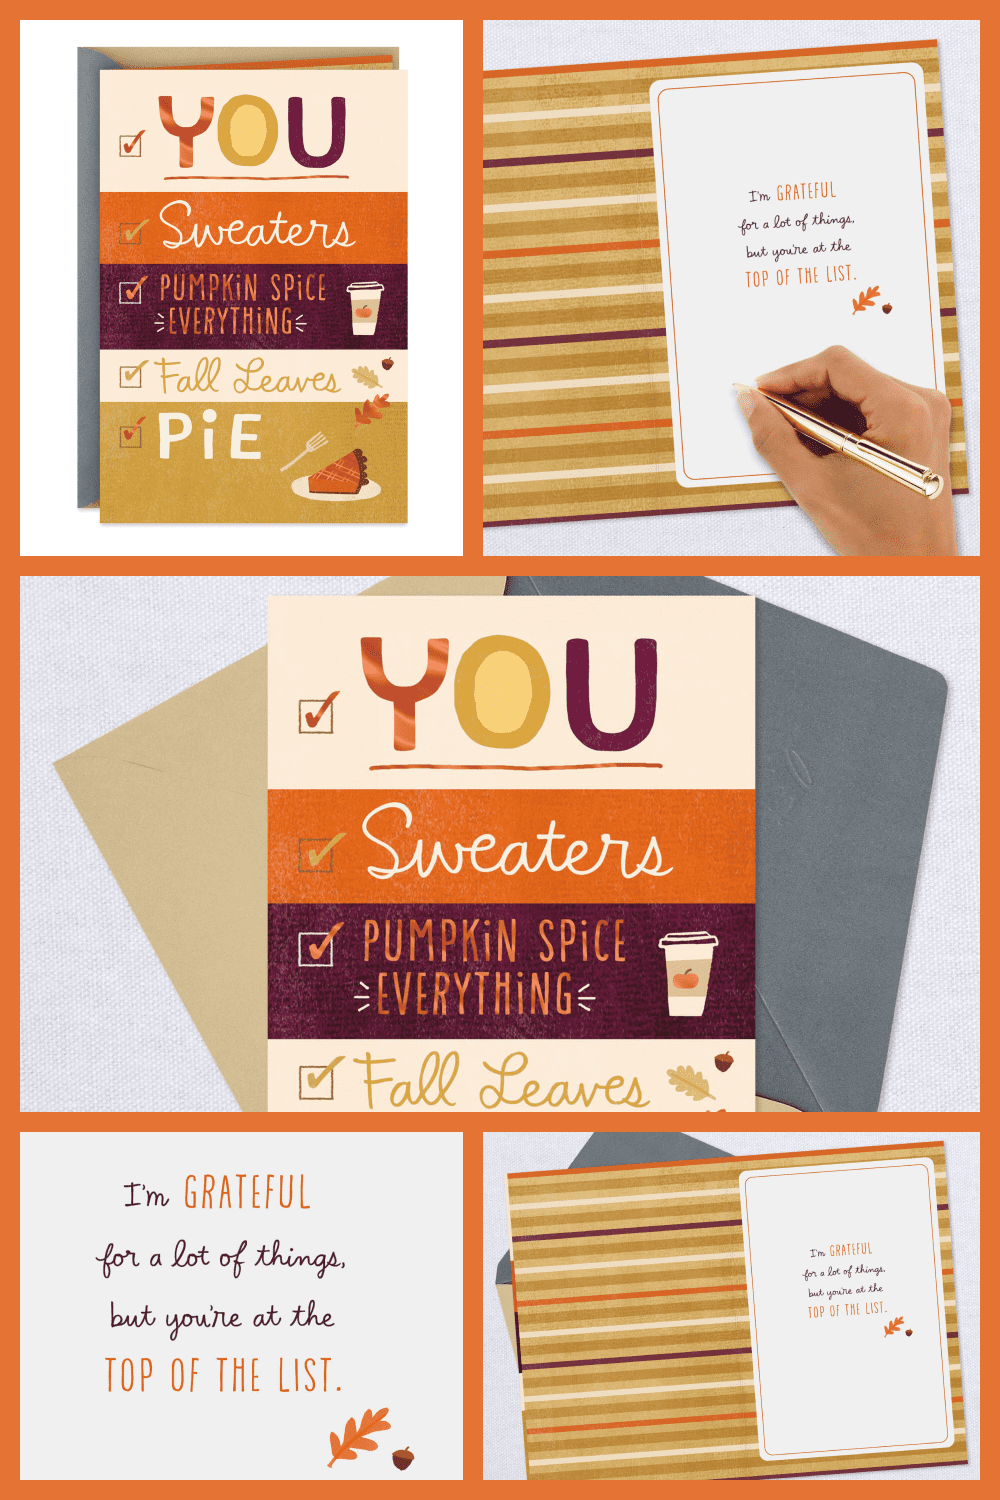 Grateful for you, sweaters and pumpkin spice thanksgiving card.